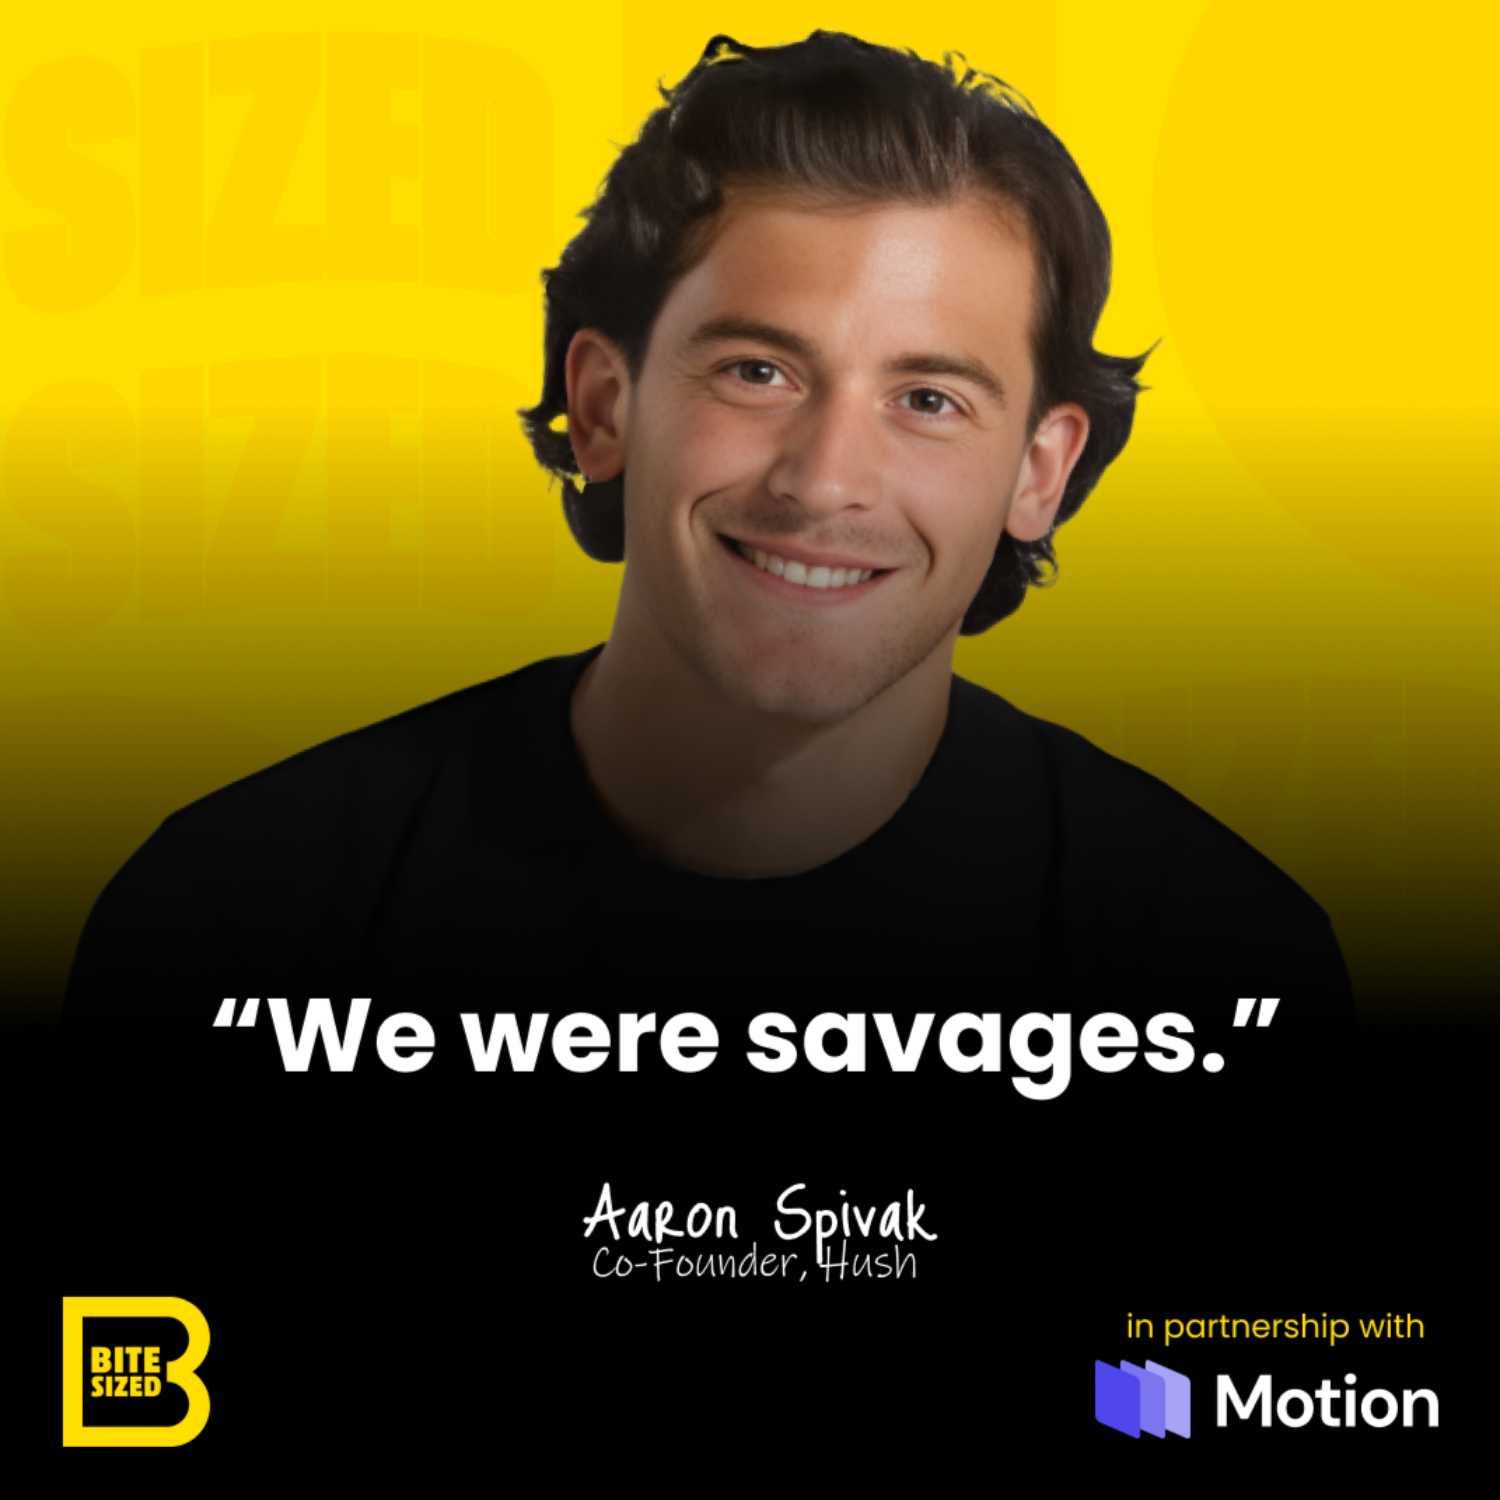 From $900k to $10M in 12 months - Hyper Growth Lessons From Hush Co-Founder & CEO, Aaron Spivak